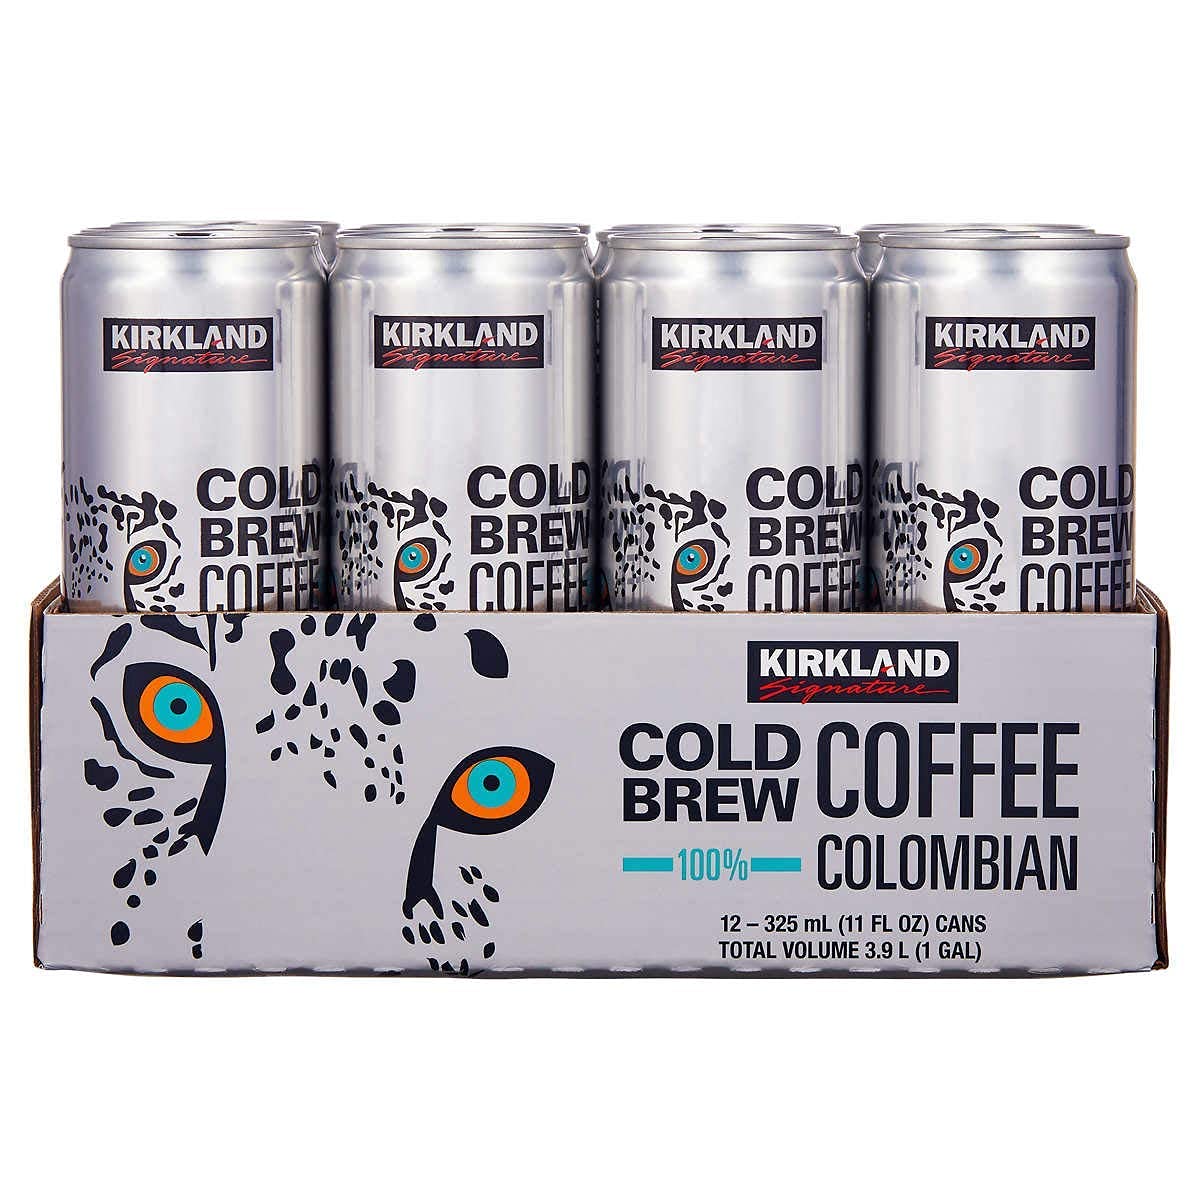 Kirkland Signature Cold Brew Columbian Coffee-Pack of 12, 11 oz. Cans-$15.99-Amazon